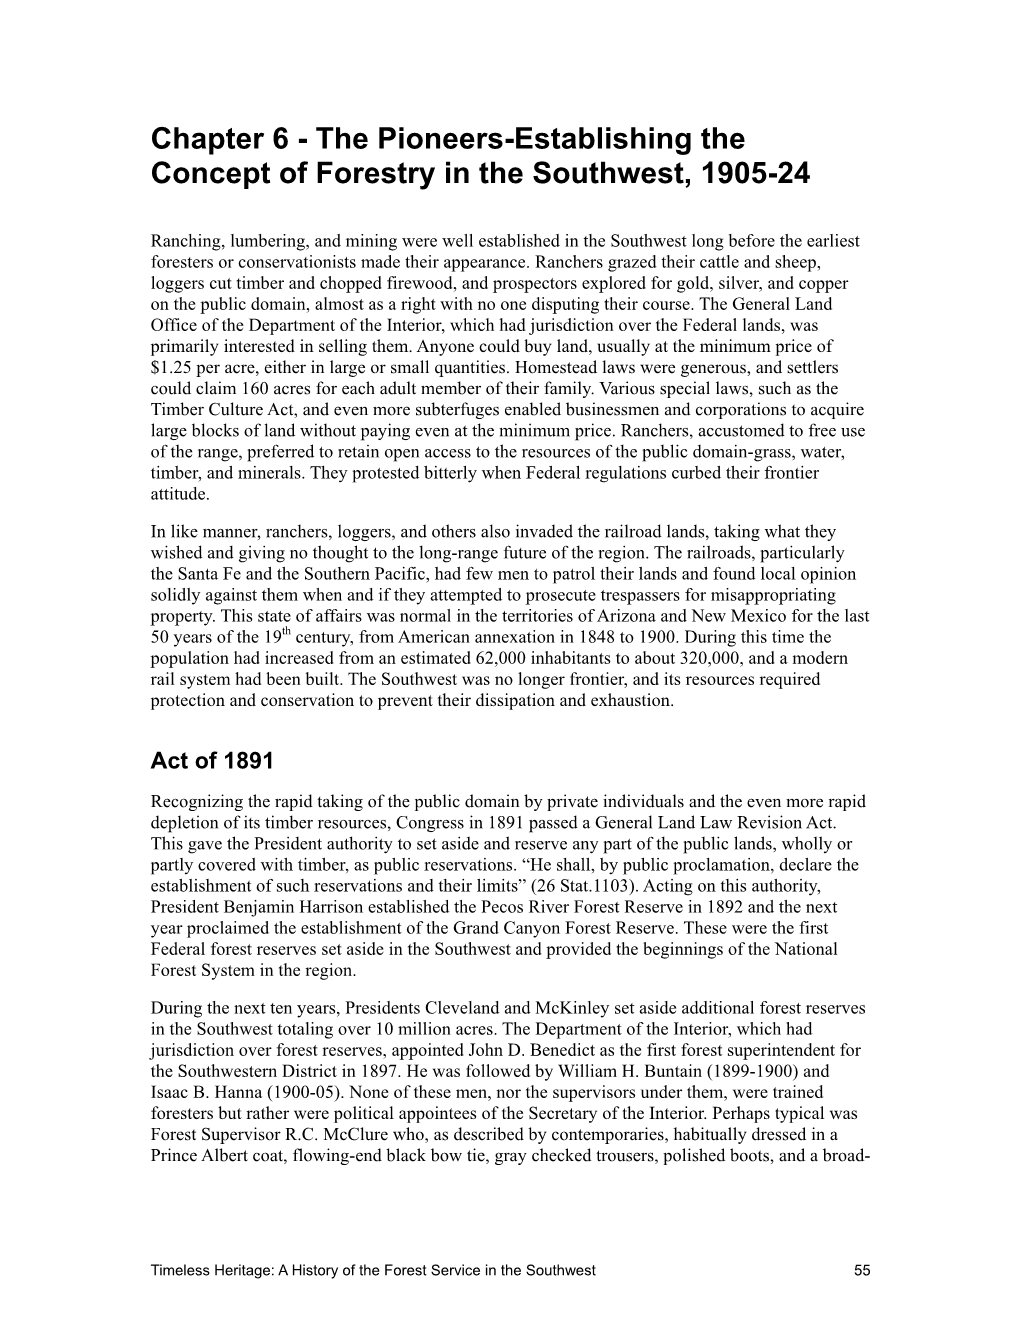 The Pioneers-Establishing the Concept of Forestry in the Southwest, 1905-24